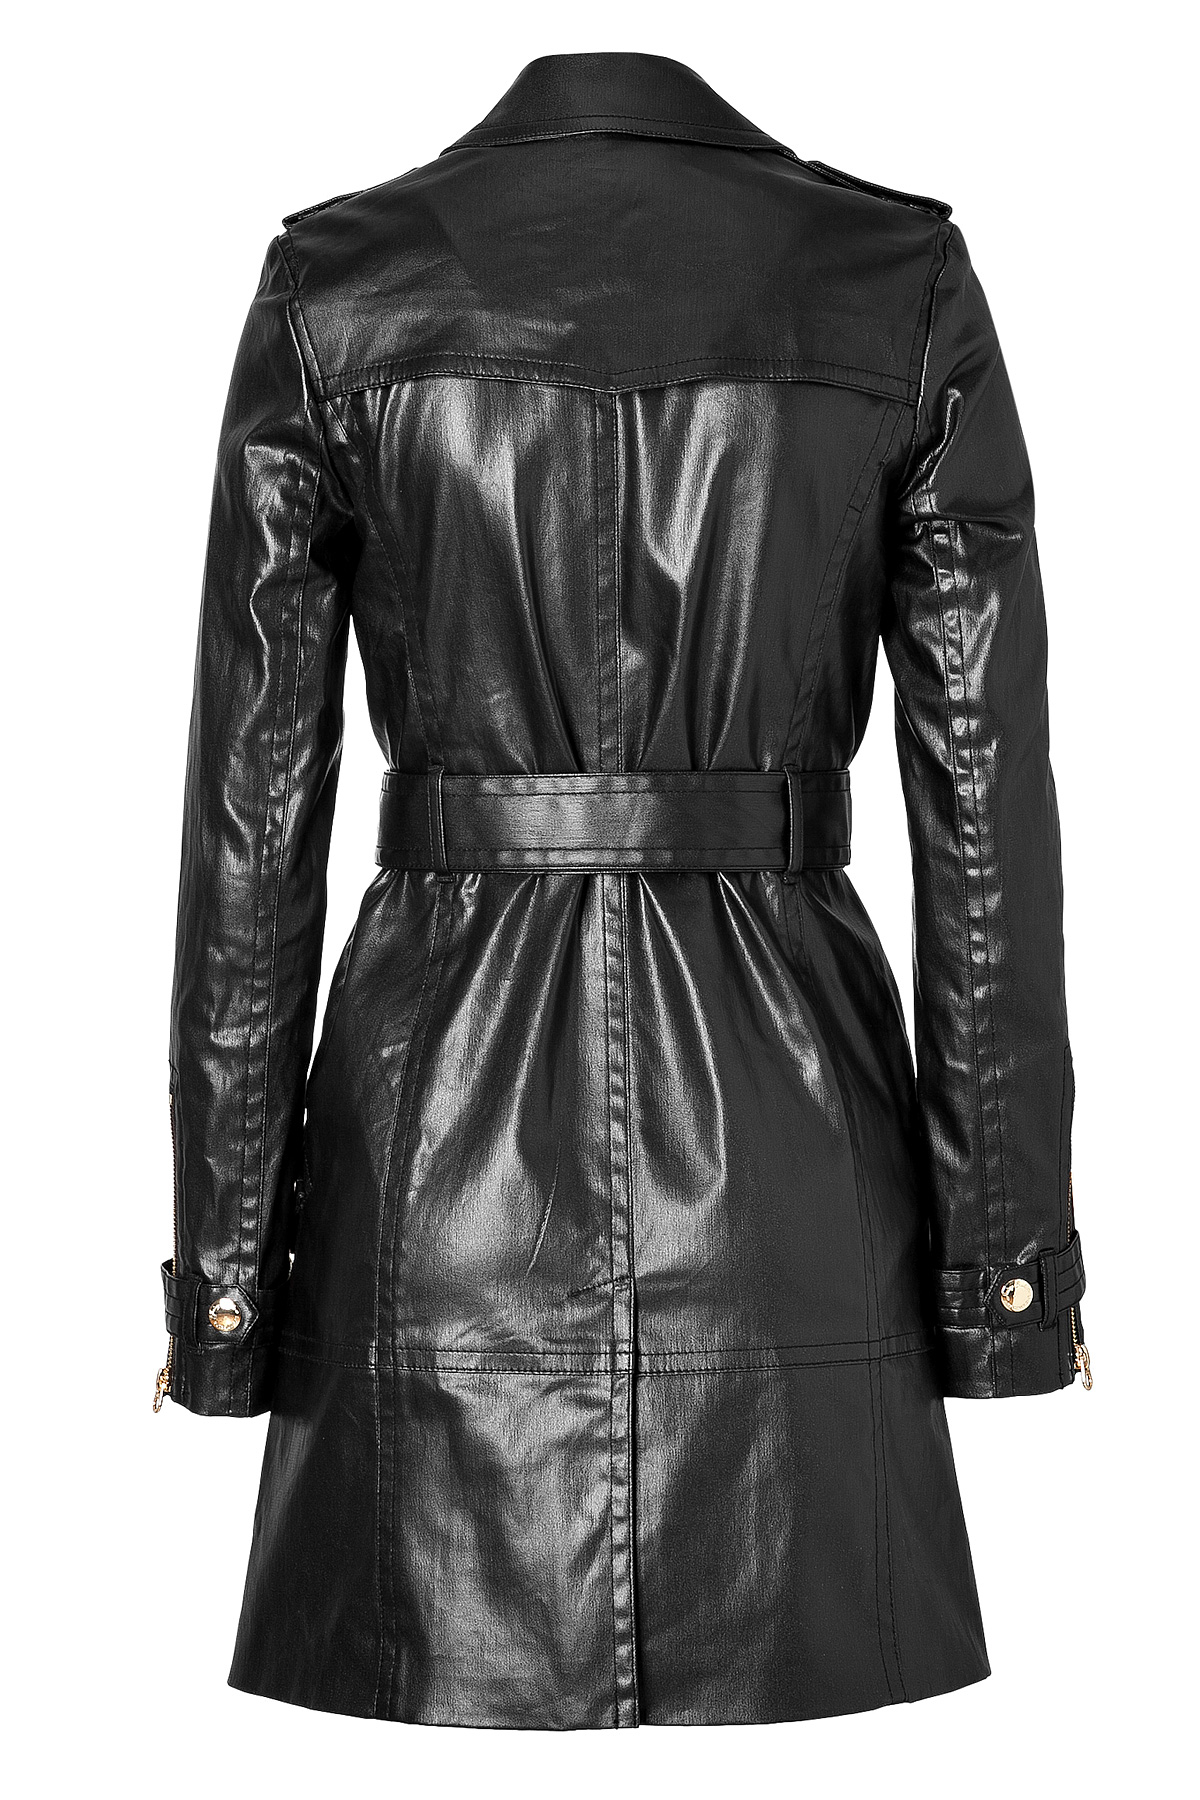 Juicy couture Coated Trench Coat in Pitch Black in Black | Lyst